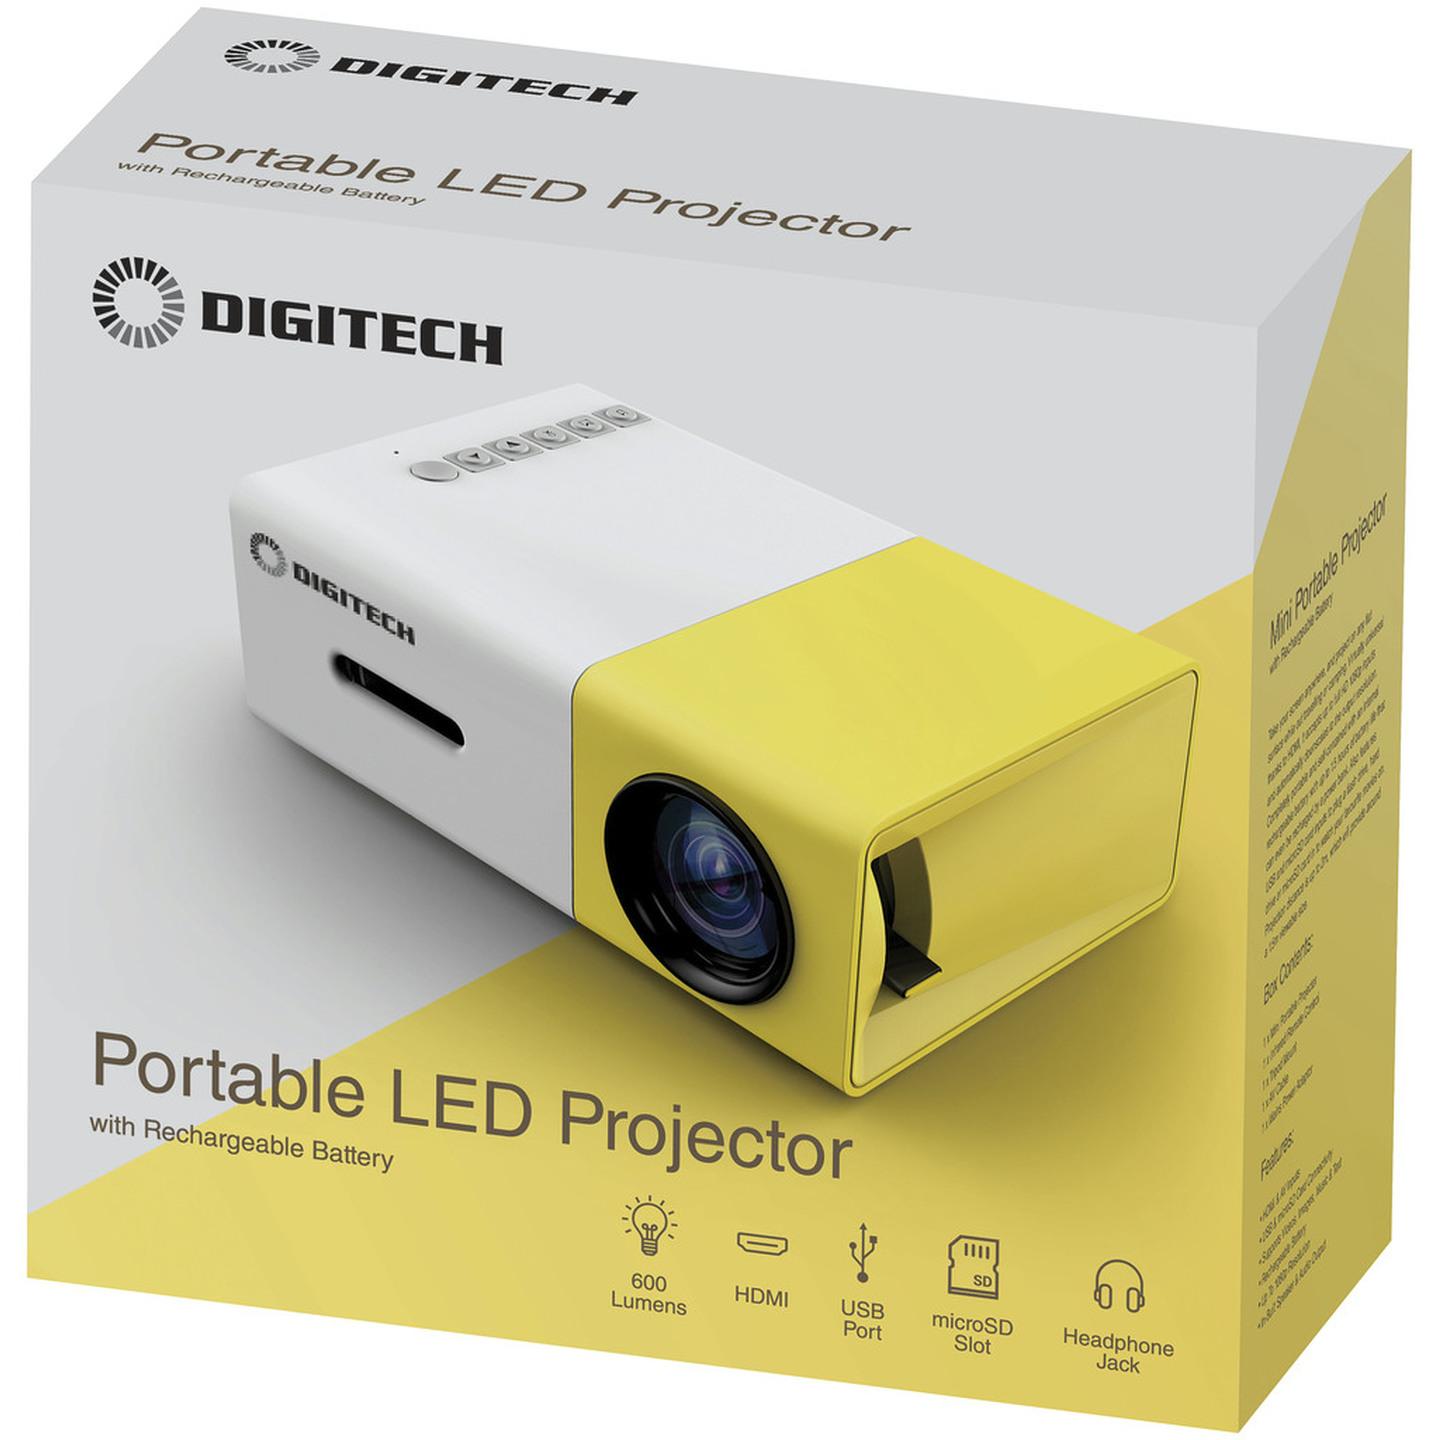 Portable LED Projector with HDMI & USB